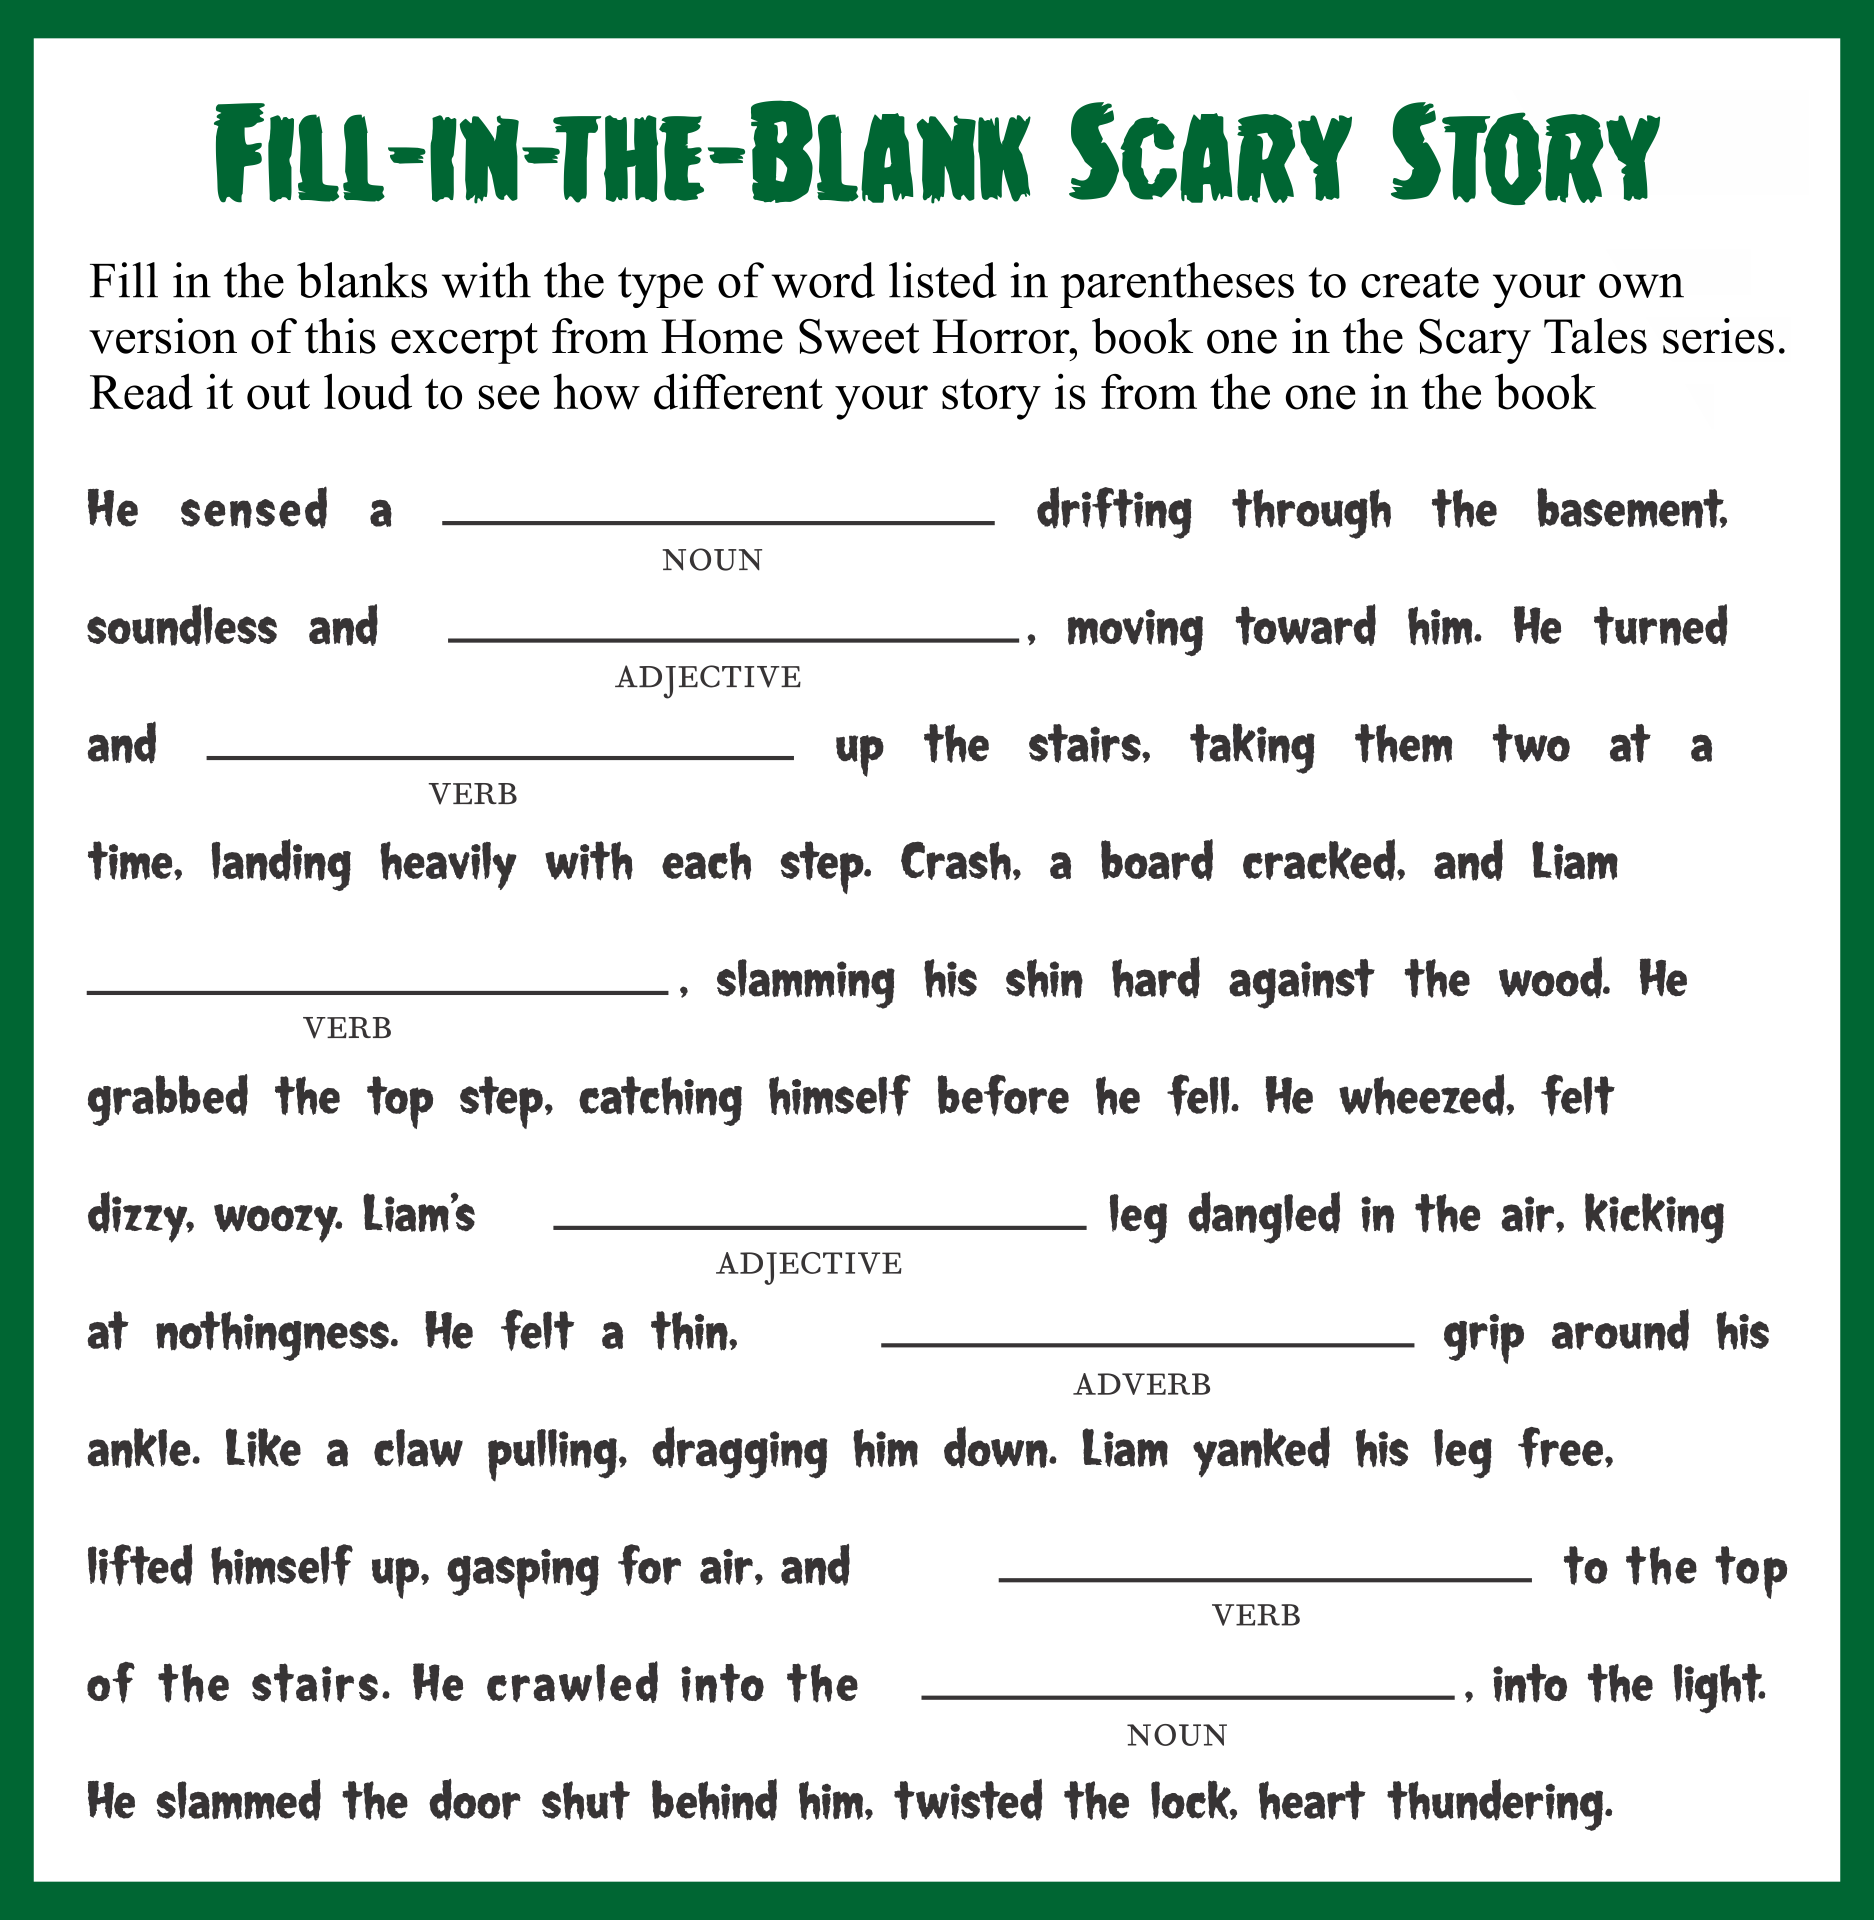 Fill-in-the-Blanks Halloween Story